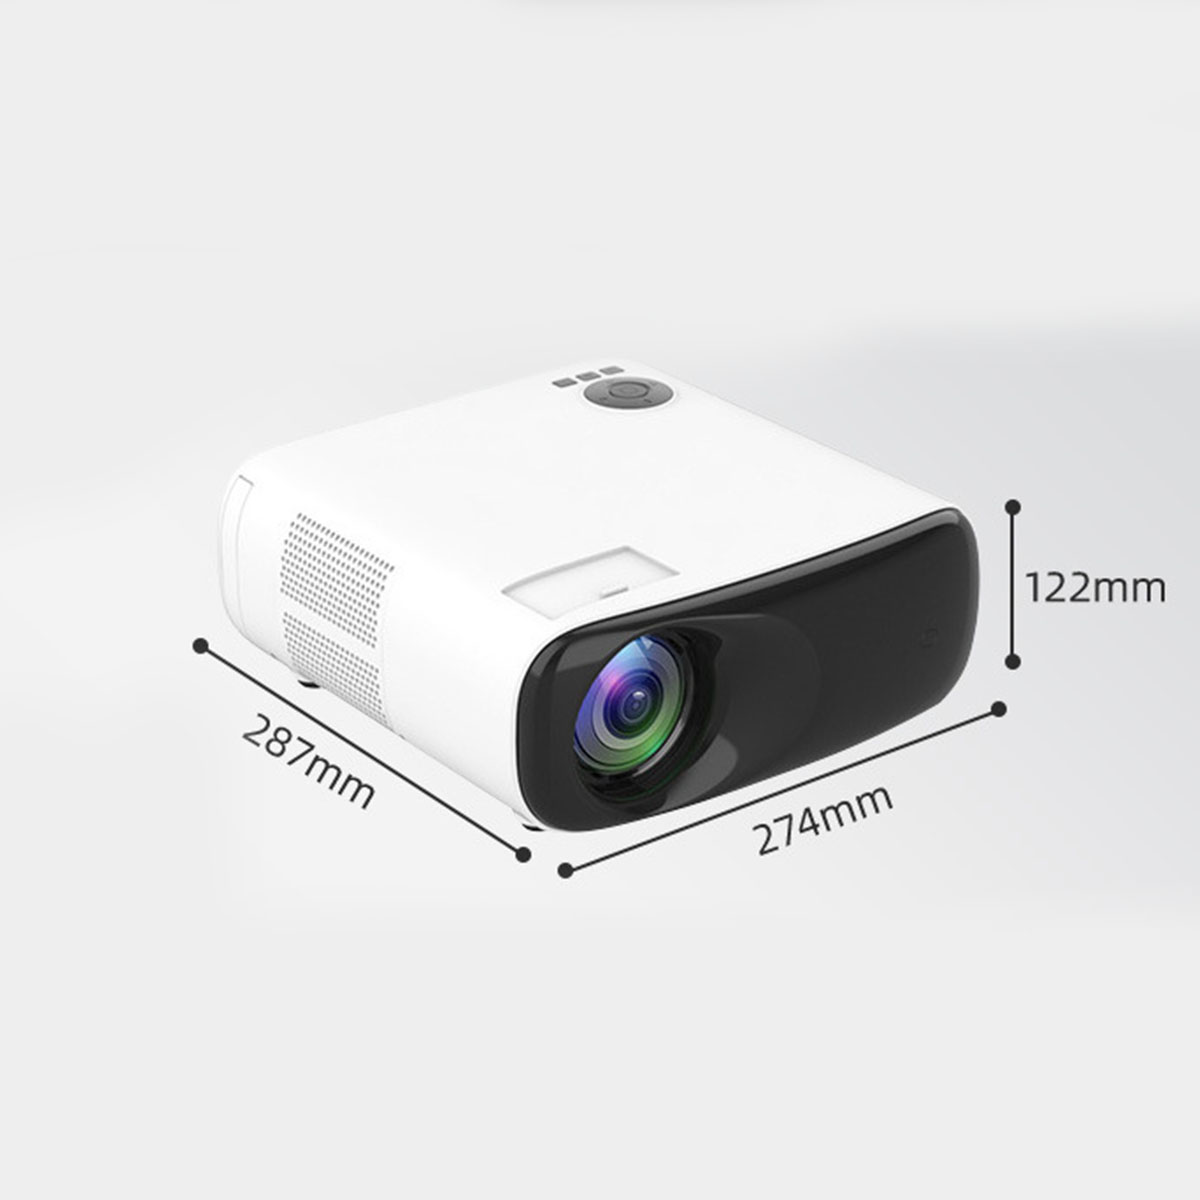 BRIGHTAKE 4K) Quality, 5GWIFI, Beamer(HDR Android 4K Projector HD Smart Voice | Control